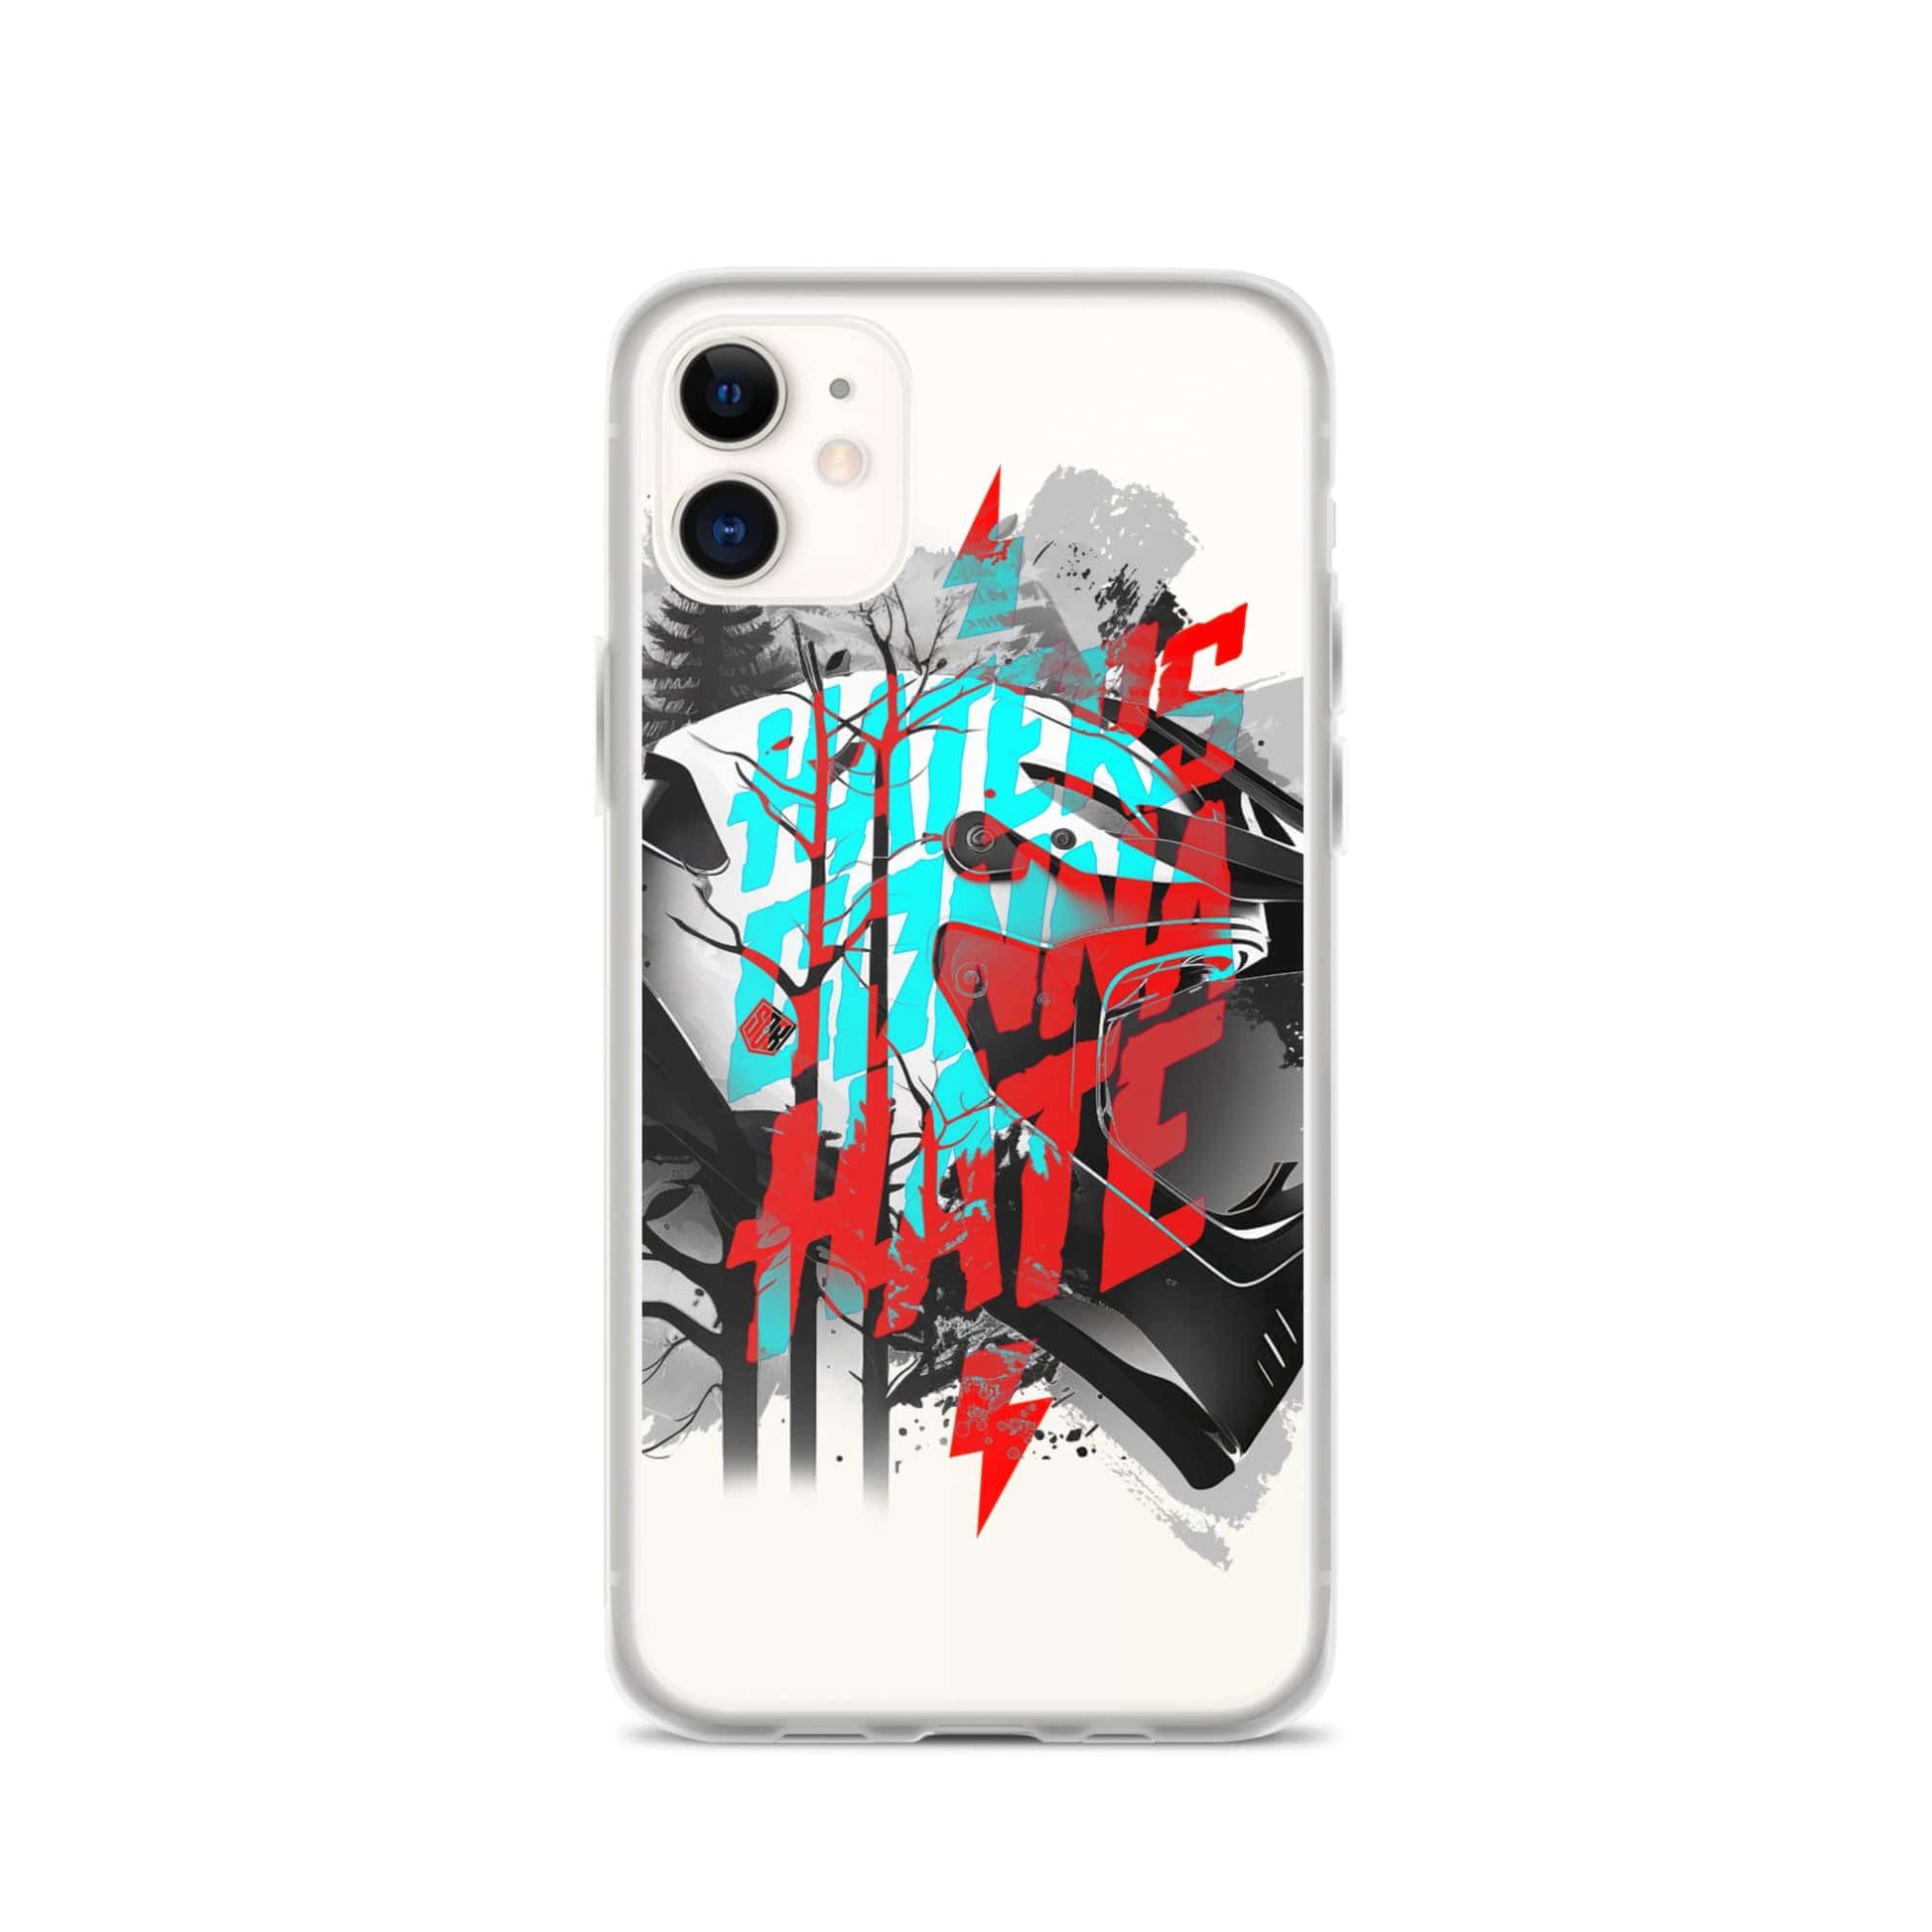 Sons of Battery® - E-MTB Brand & Community iPhone 11 Haters gonna hate - iPhone-Hülle E-Bike-Community